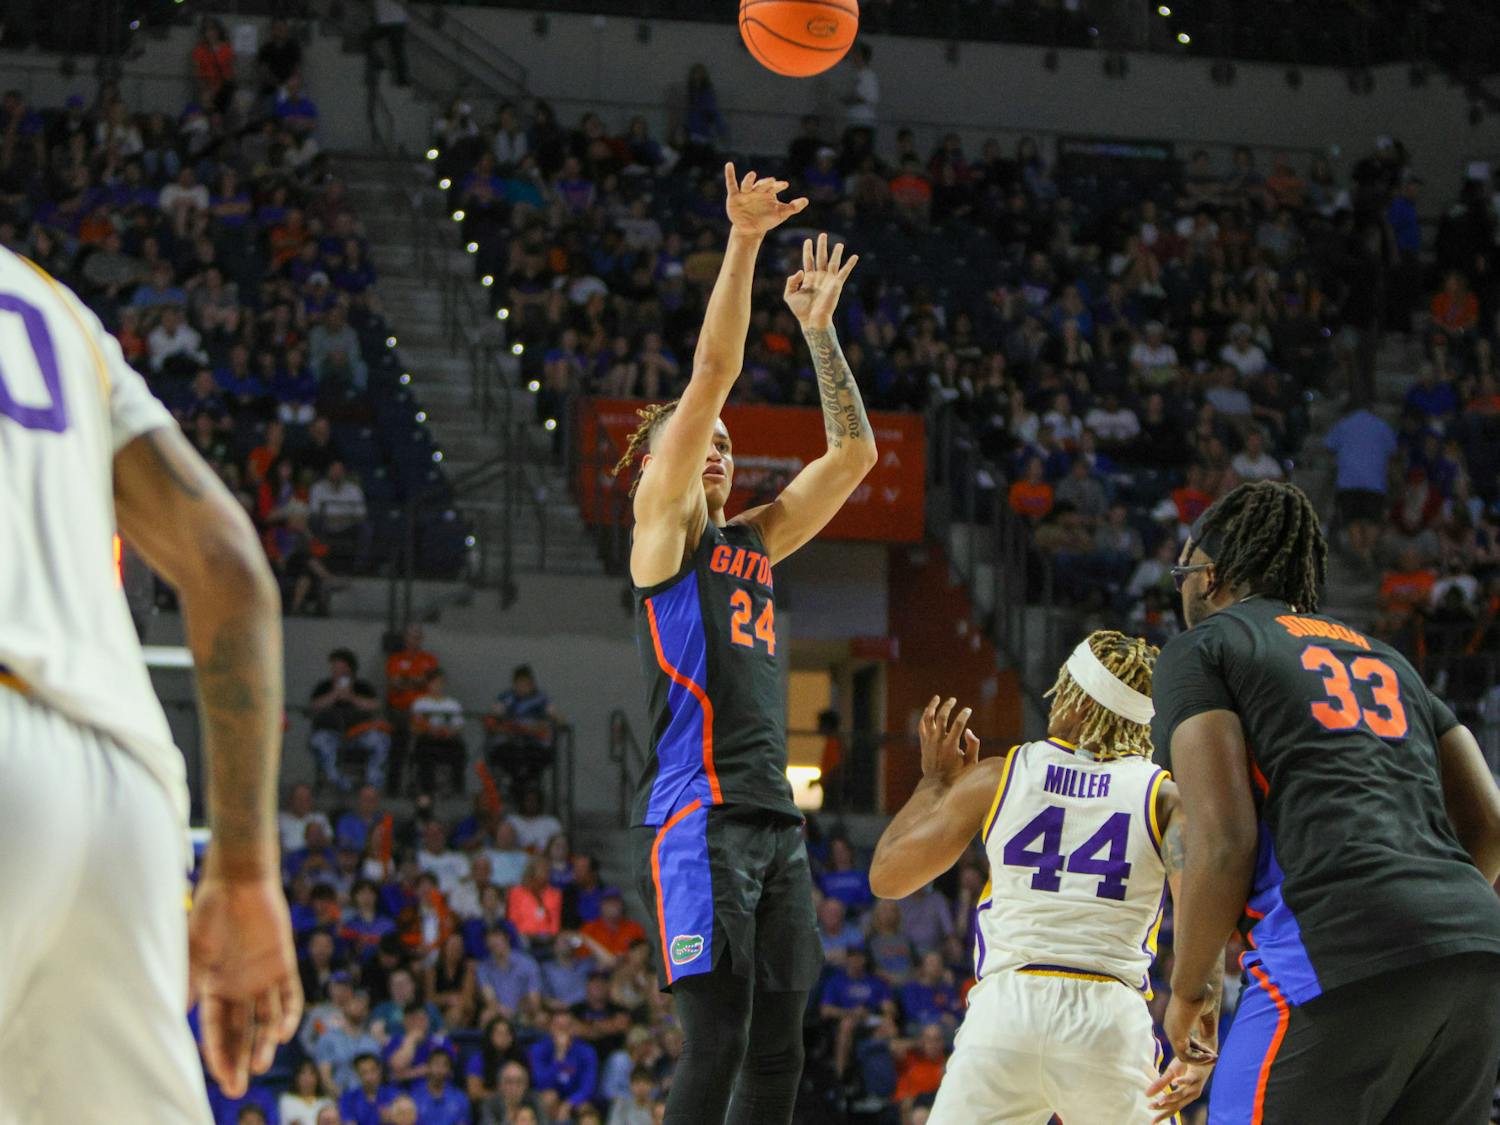 Florida guard Riley Kugel takes a jump shot in the Gators' 79-67 win against the Louisiana State Tigers Saturday, March 4, 2023.